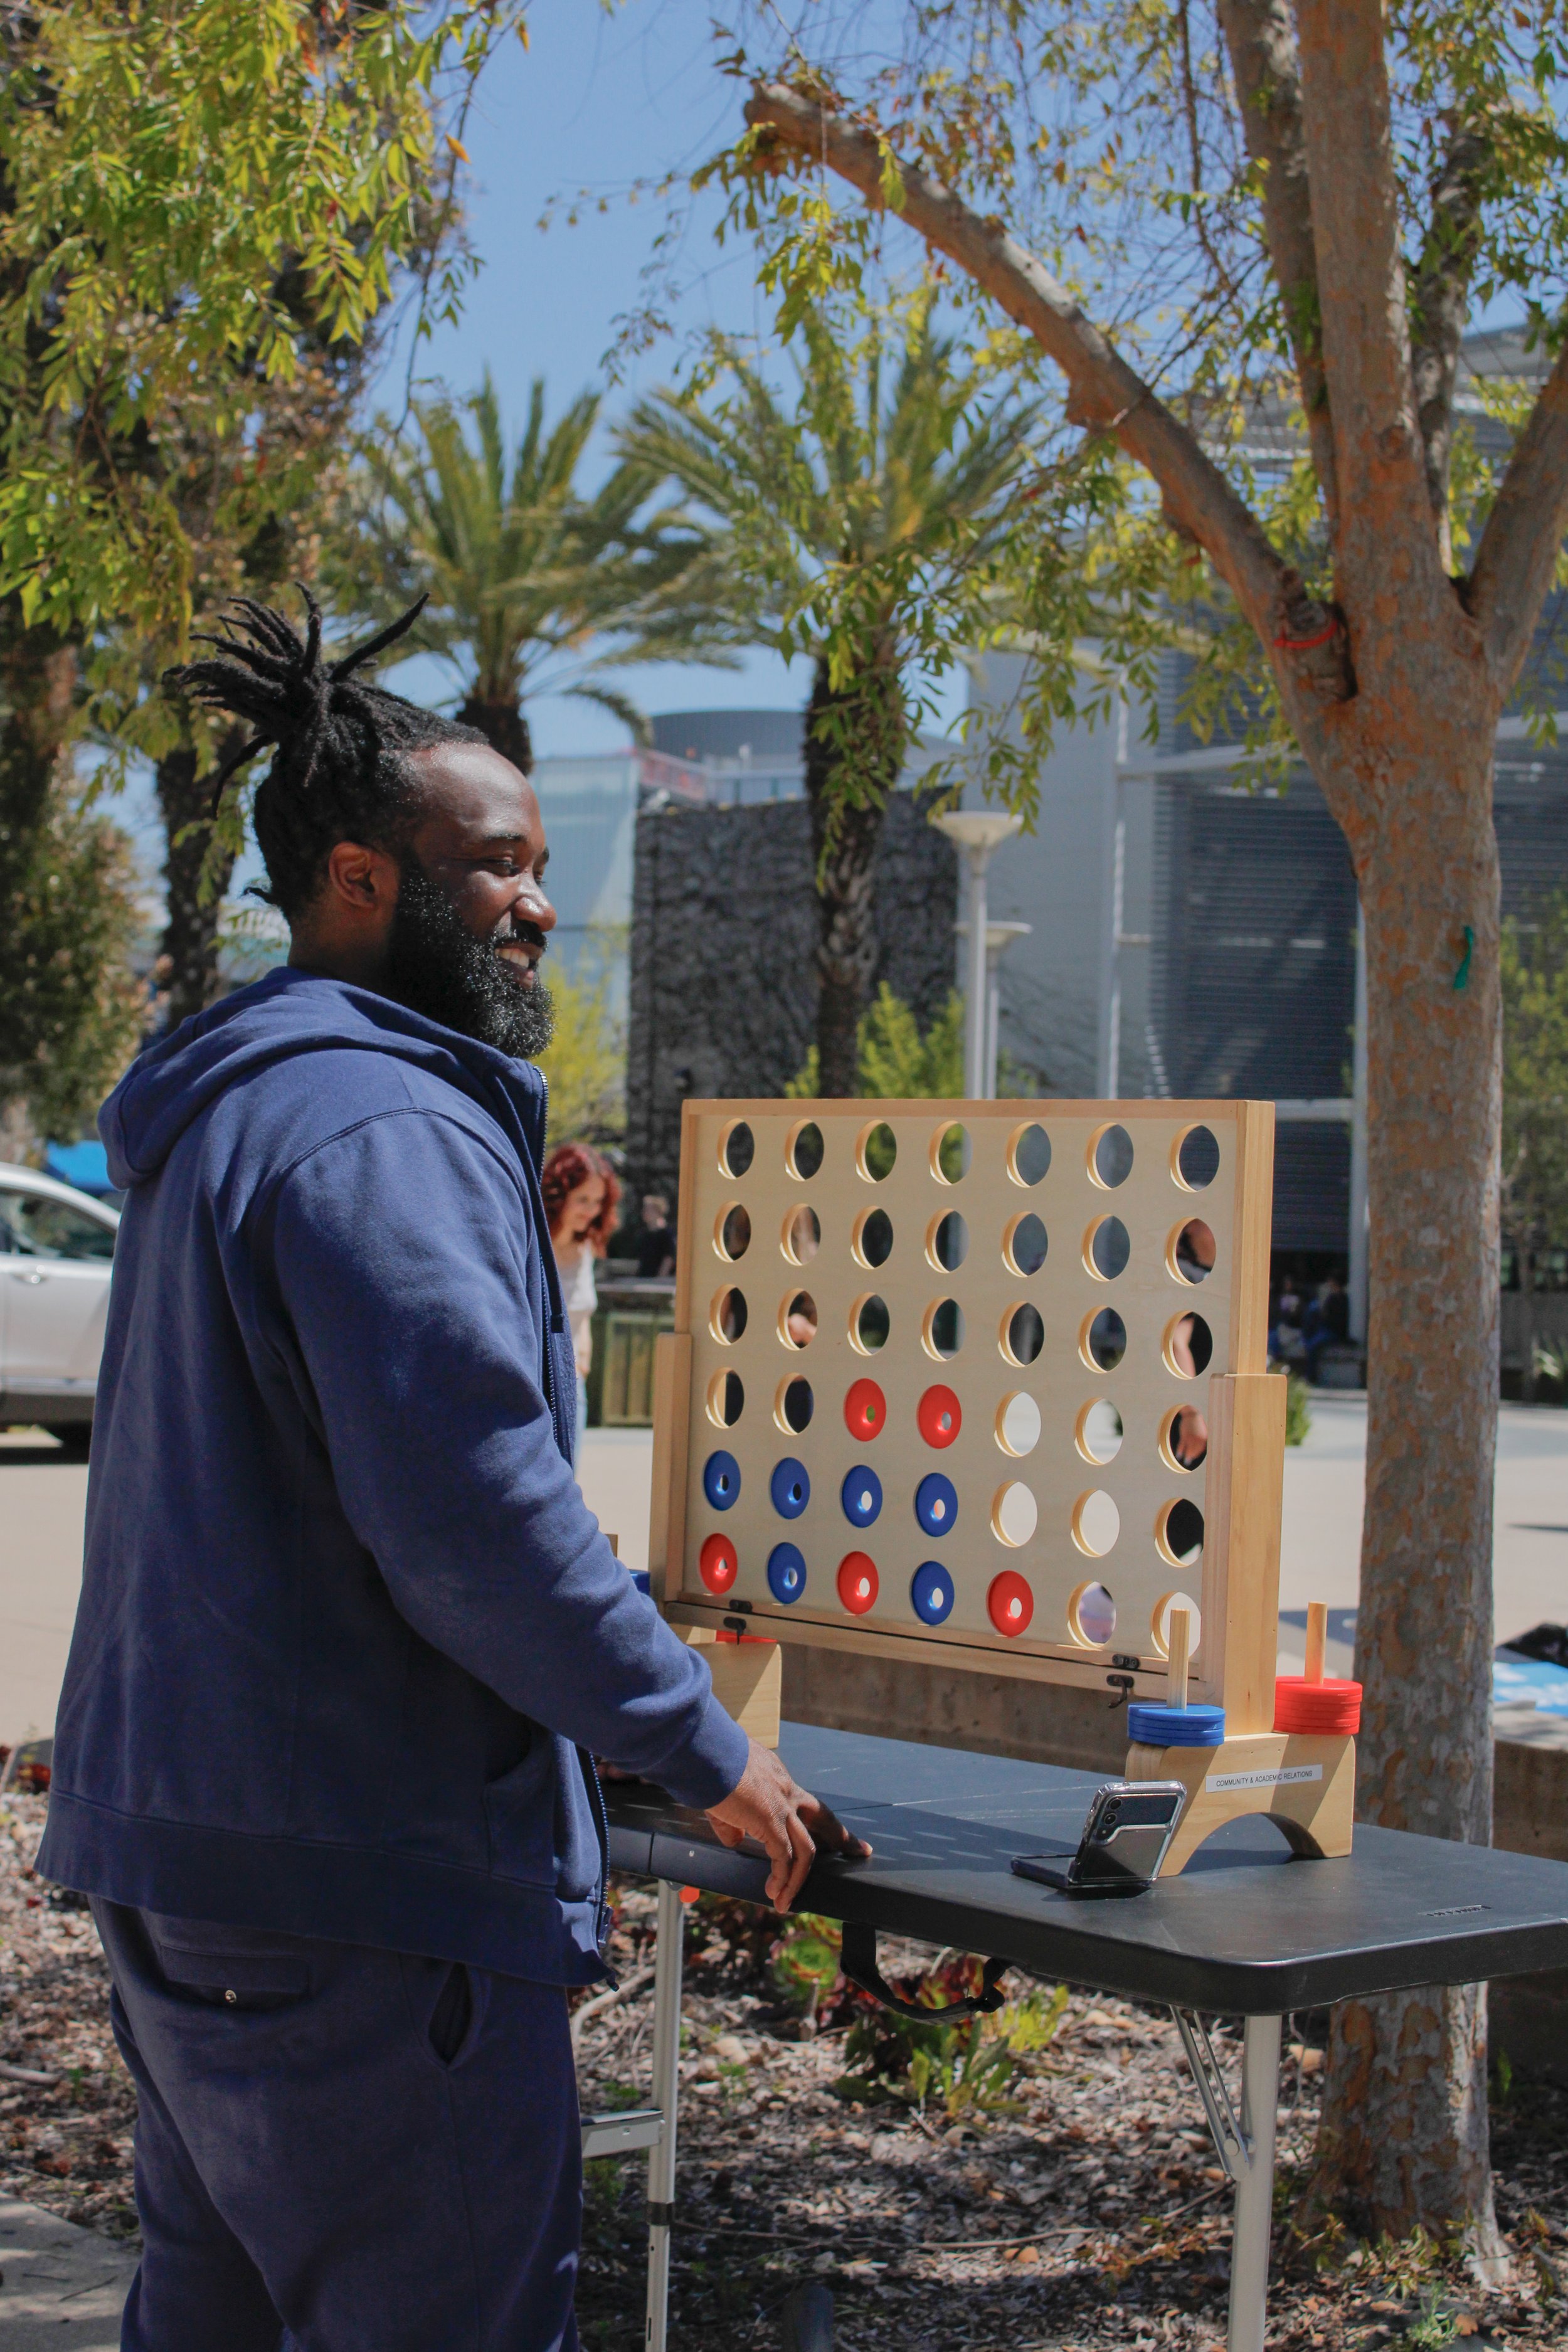  Ahmad Diakite hanging out on campus in front of a large connect four set up as a two games of corn hole unfold in front of him at Midterm Motivation day.  